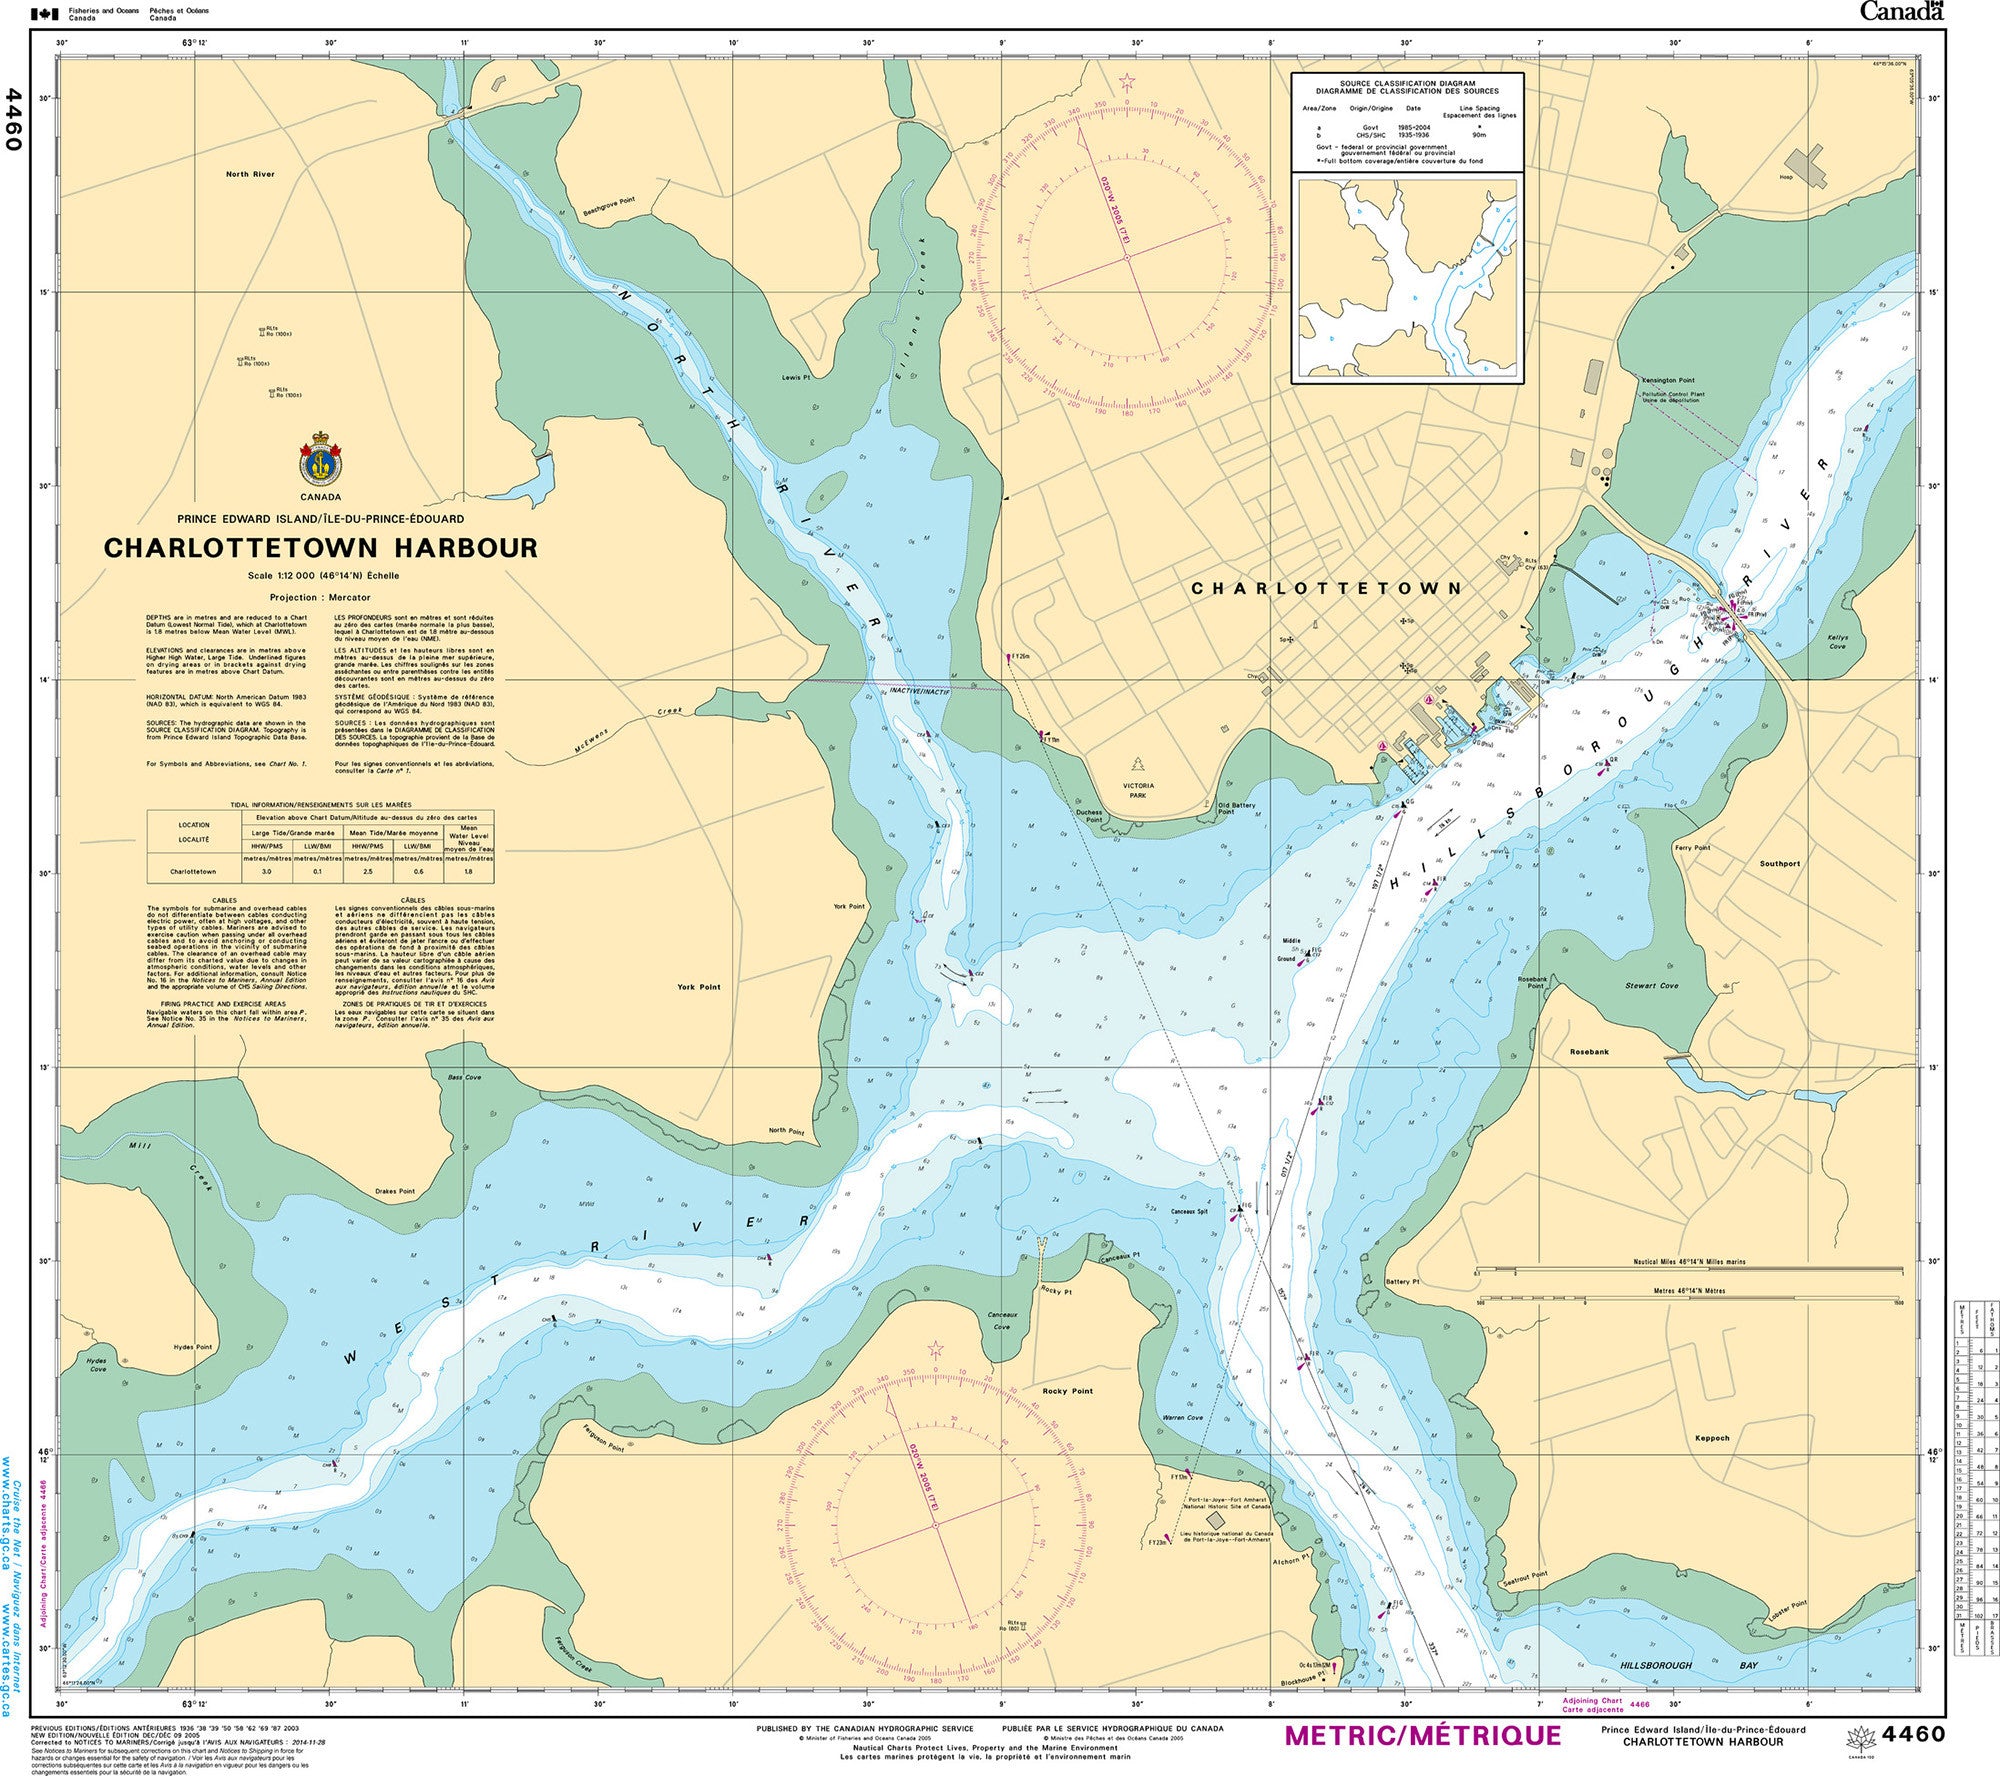 Canadian Hydrographic Service Nautical Chart CHS4460: Charlottetown Harbour